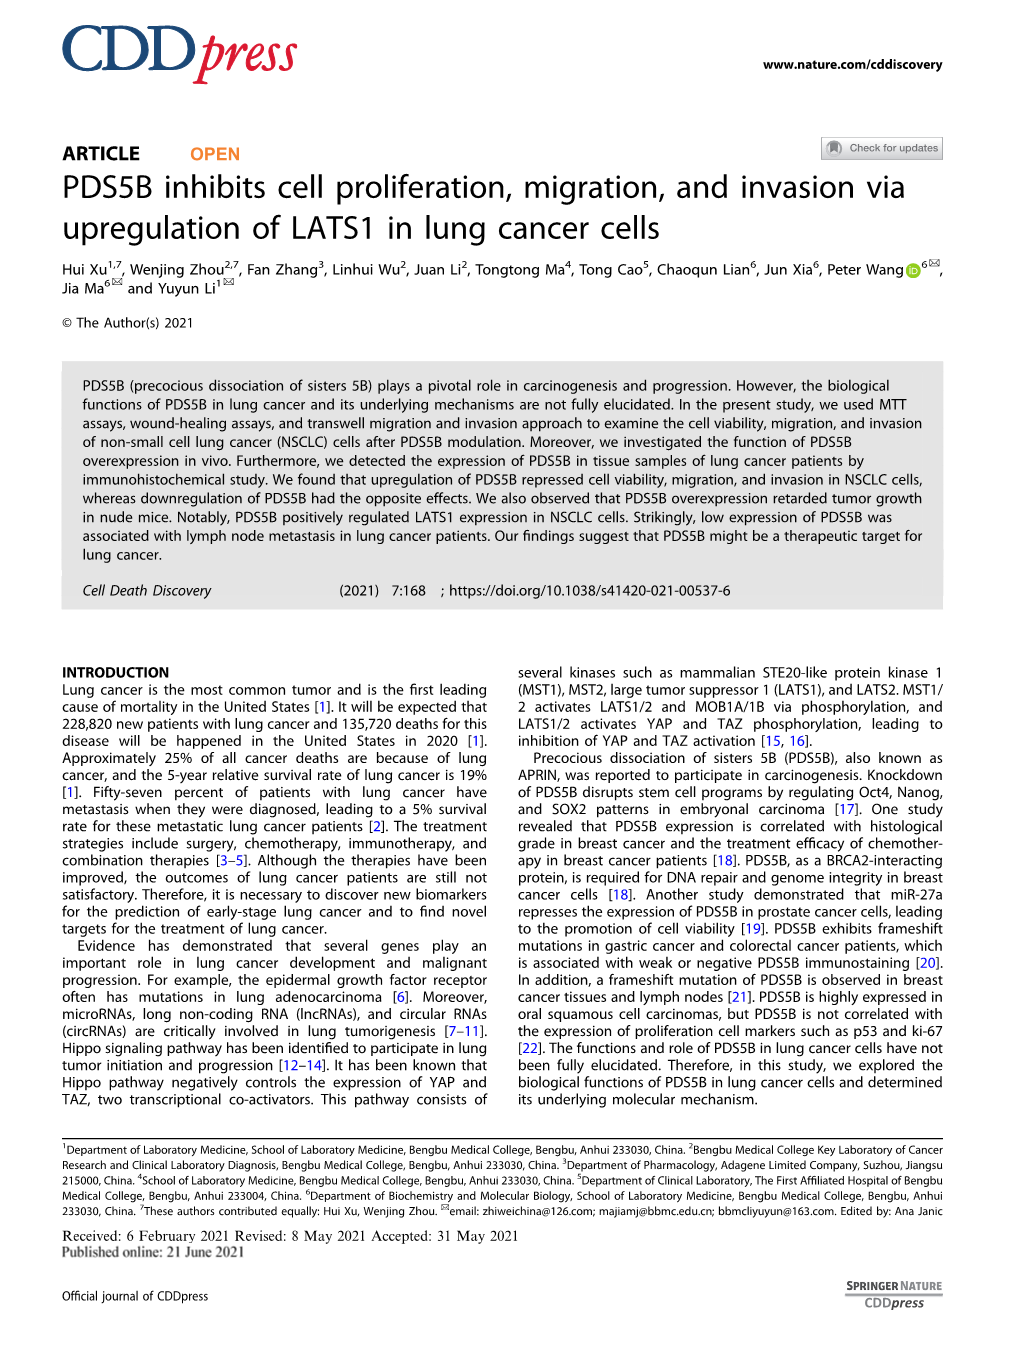 PDS5B Inhibits Cell Proliferation, Migration, and Invasion Via Upregulation of LATS1 in Lung Cancer Cells